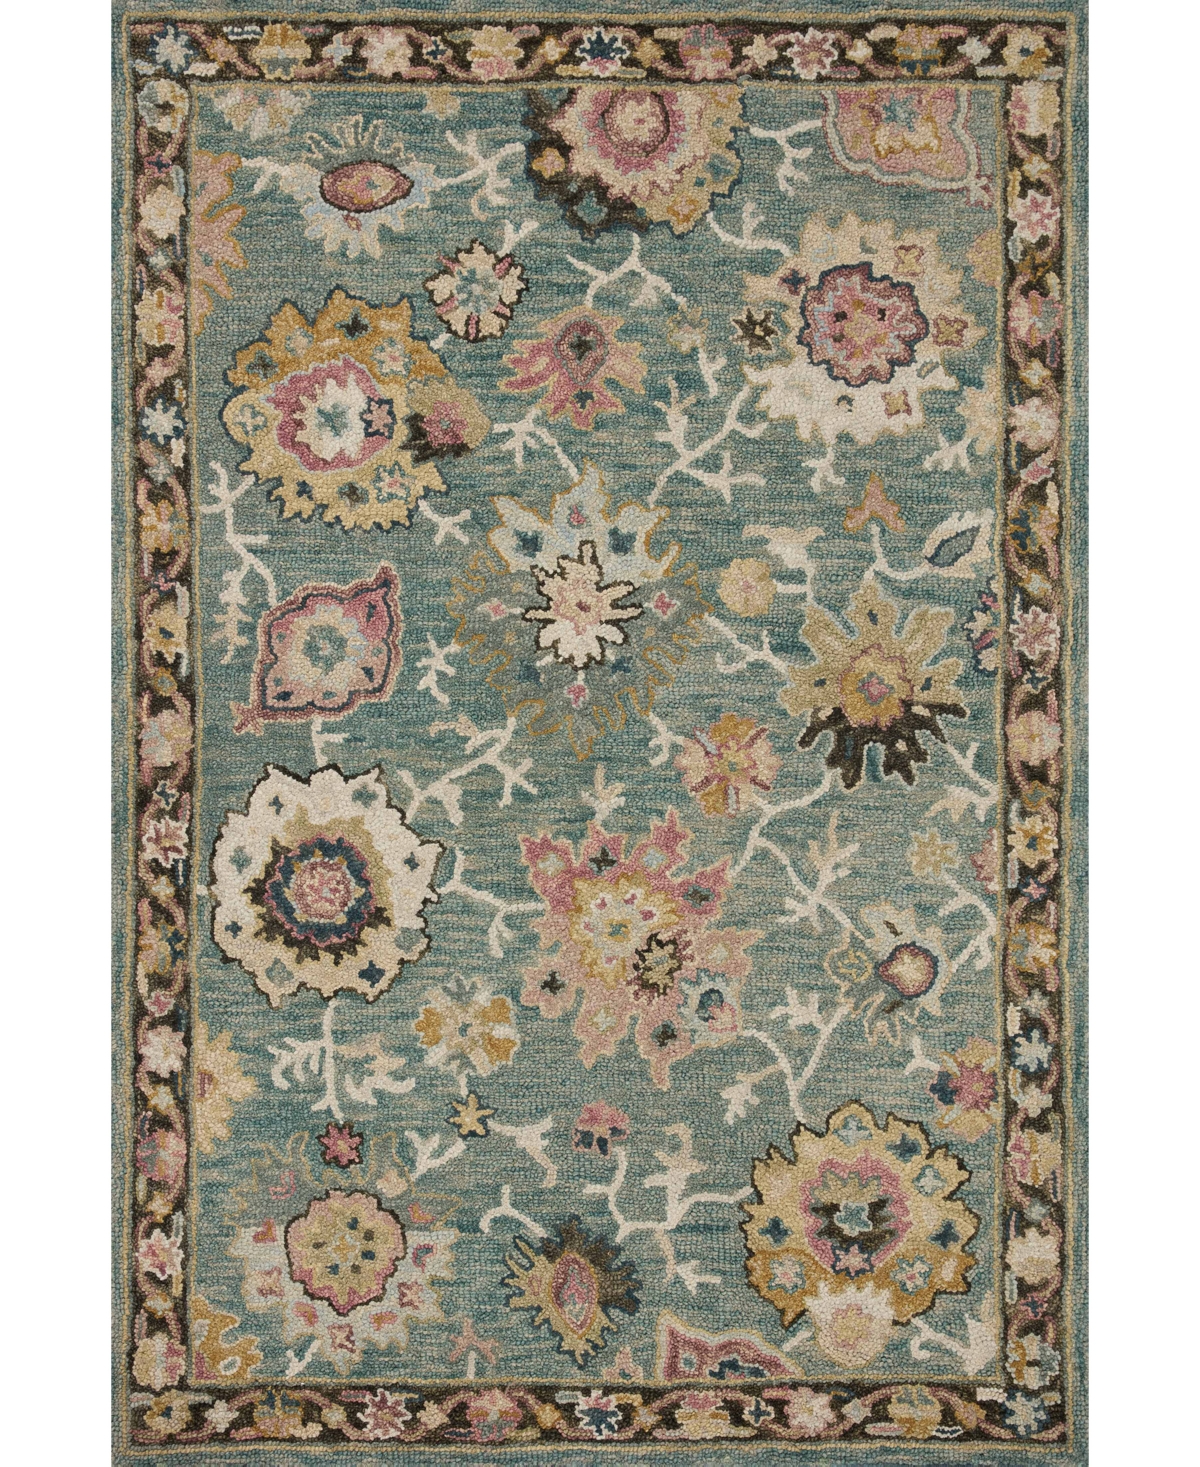 Spring Valley Home Lotus Lts-04 8'6" X 12' Area Rug In Teal/multi